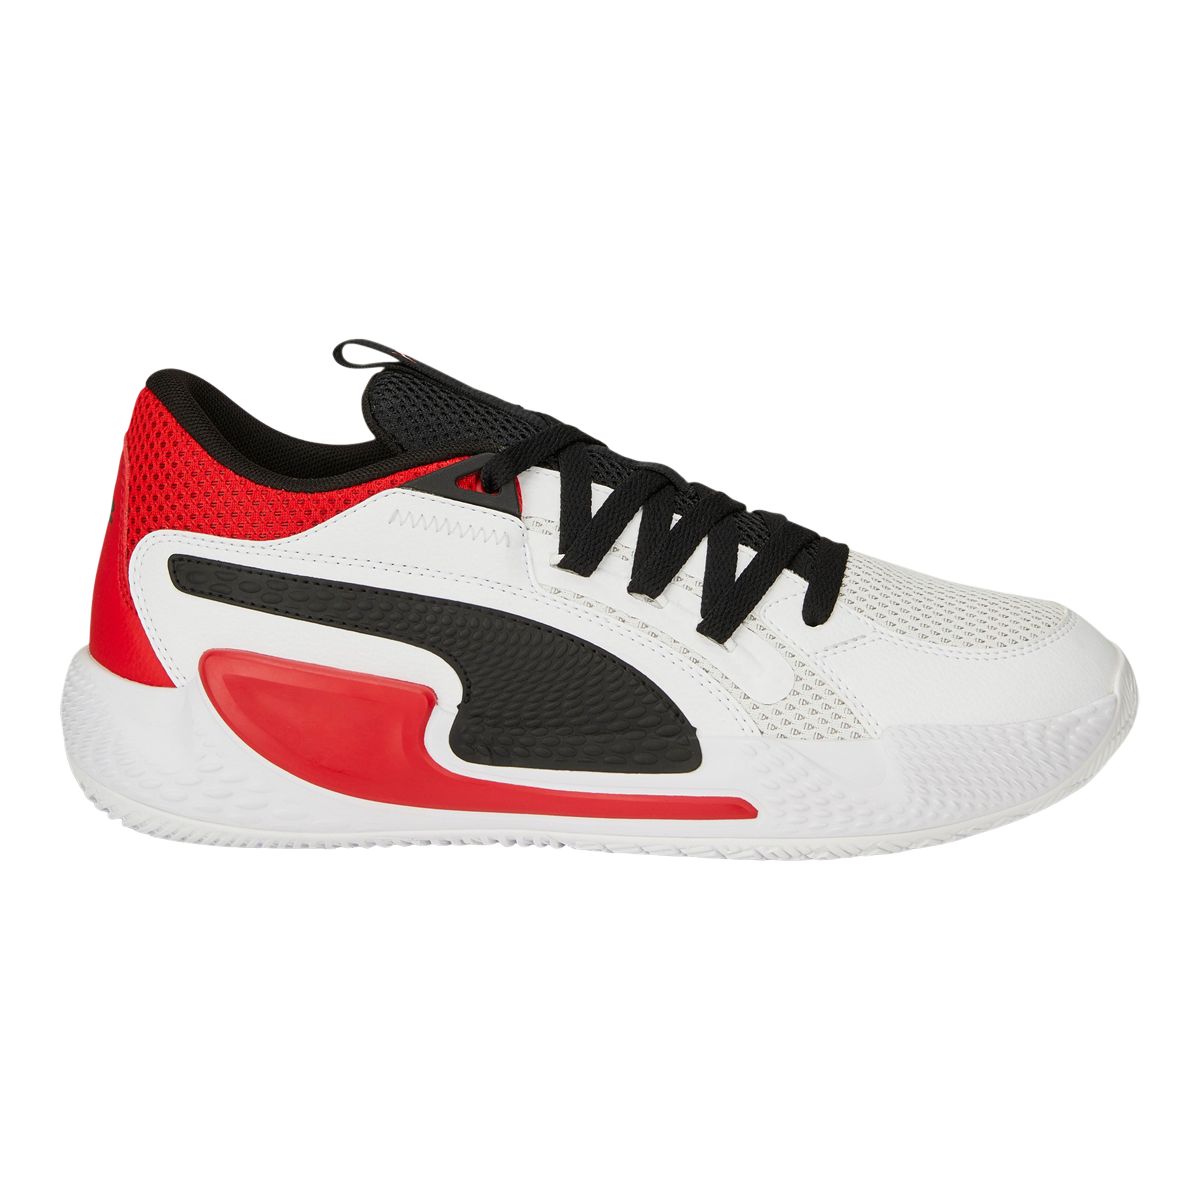 Image of Puma Men's/Women's Court Rider Chaos Basketball Shoes